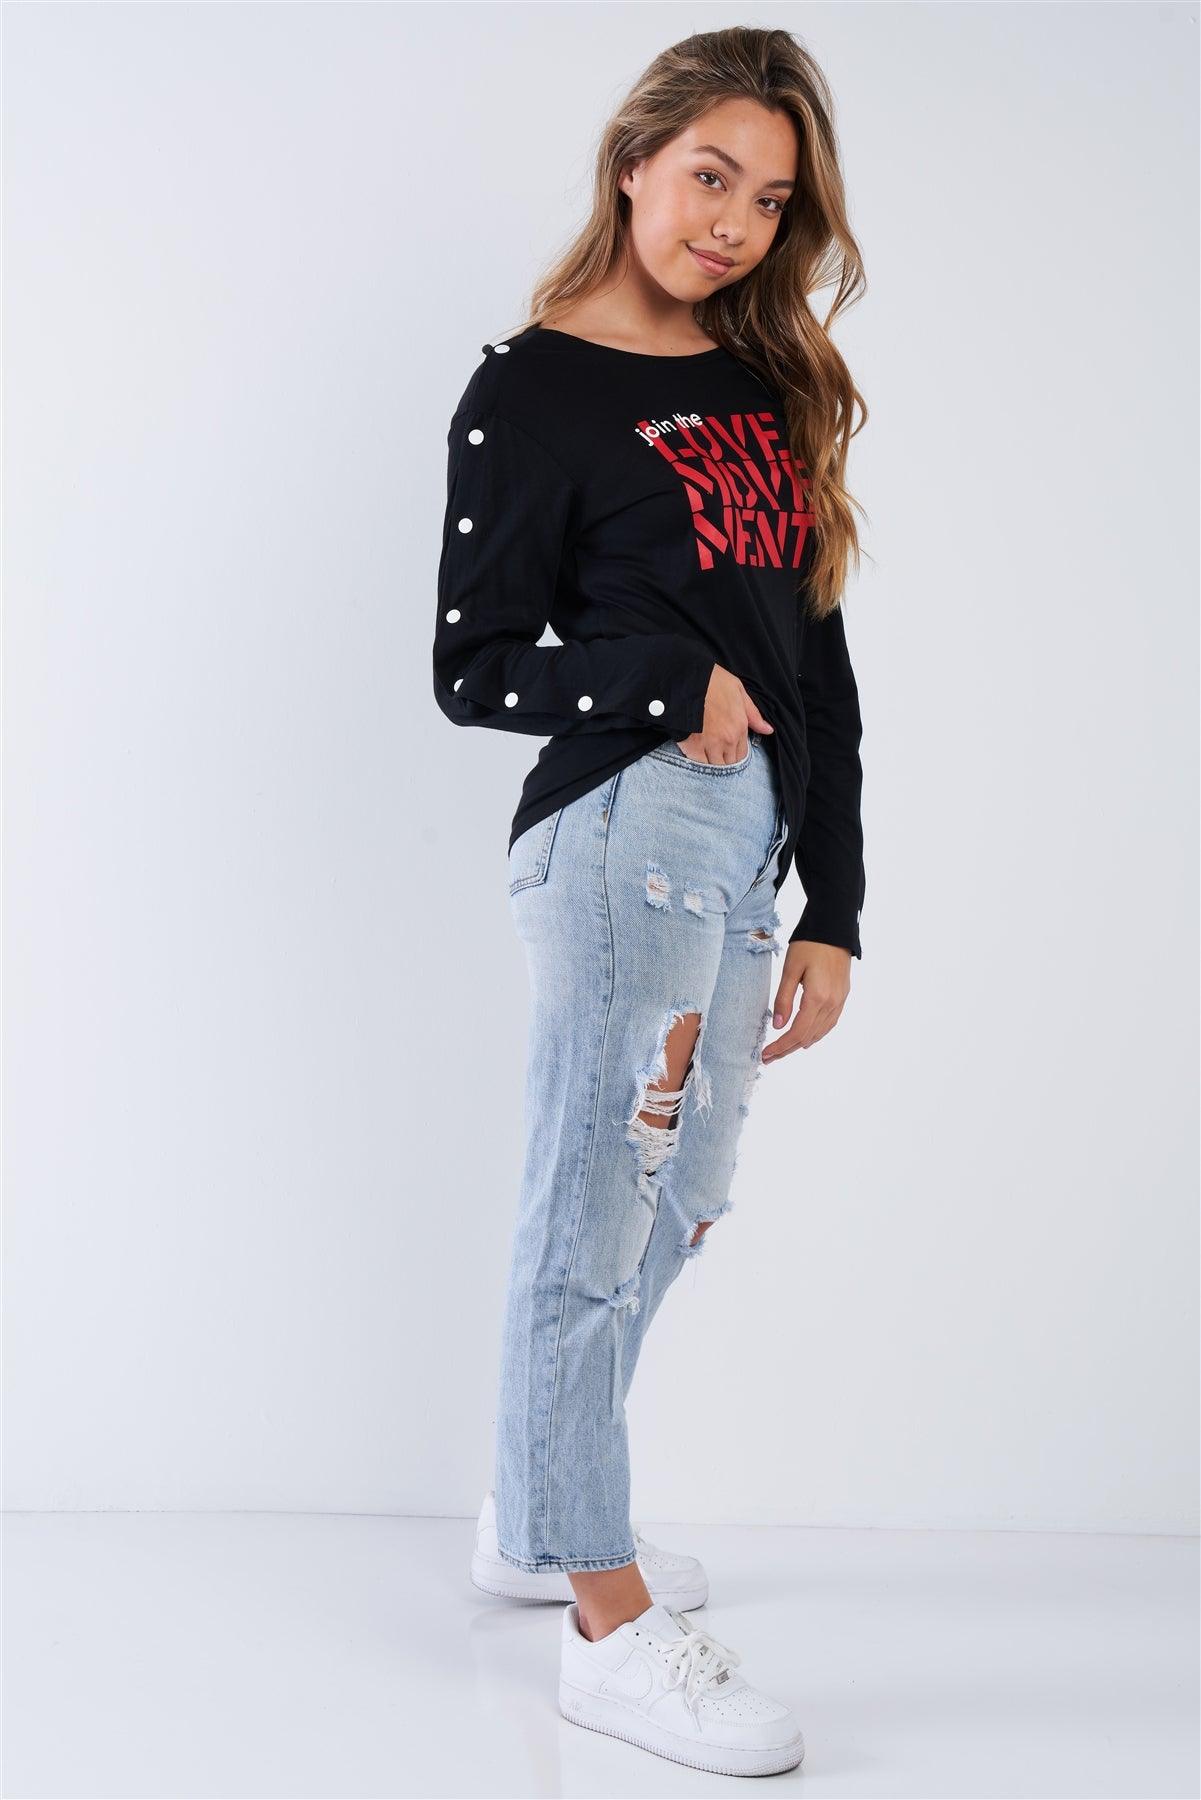 Black Long Sleeve "Join The Love Movement" Crew Neck Shoulder Snap Detail Top